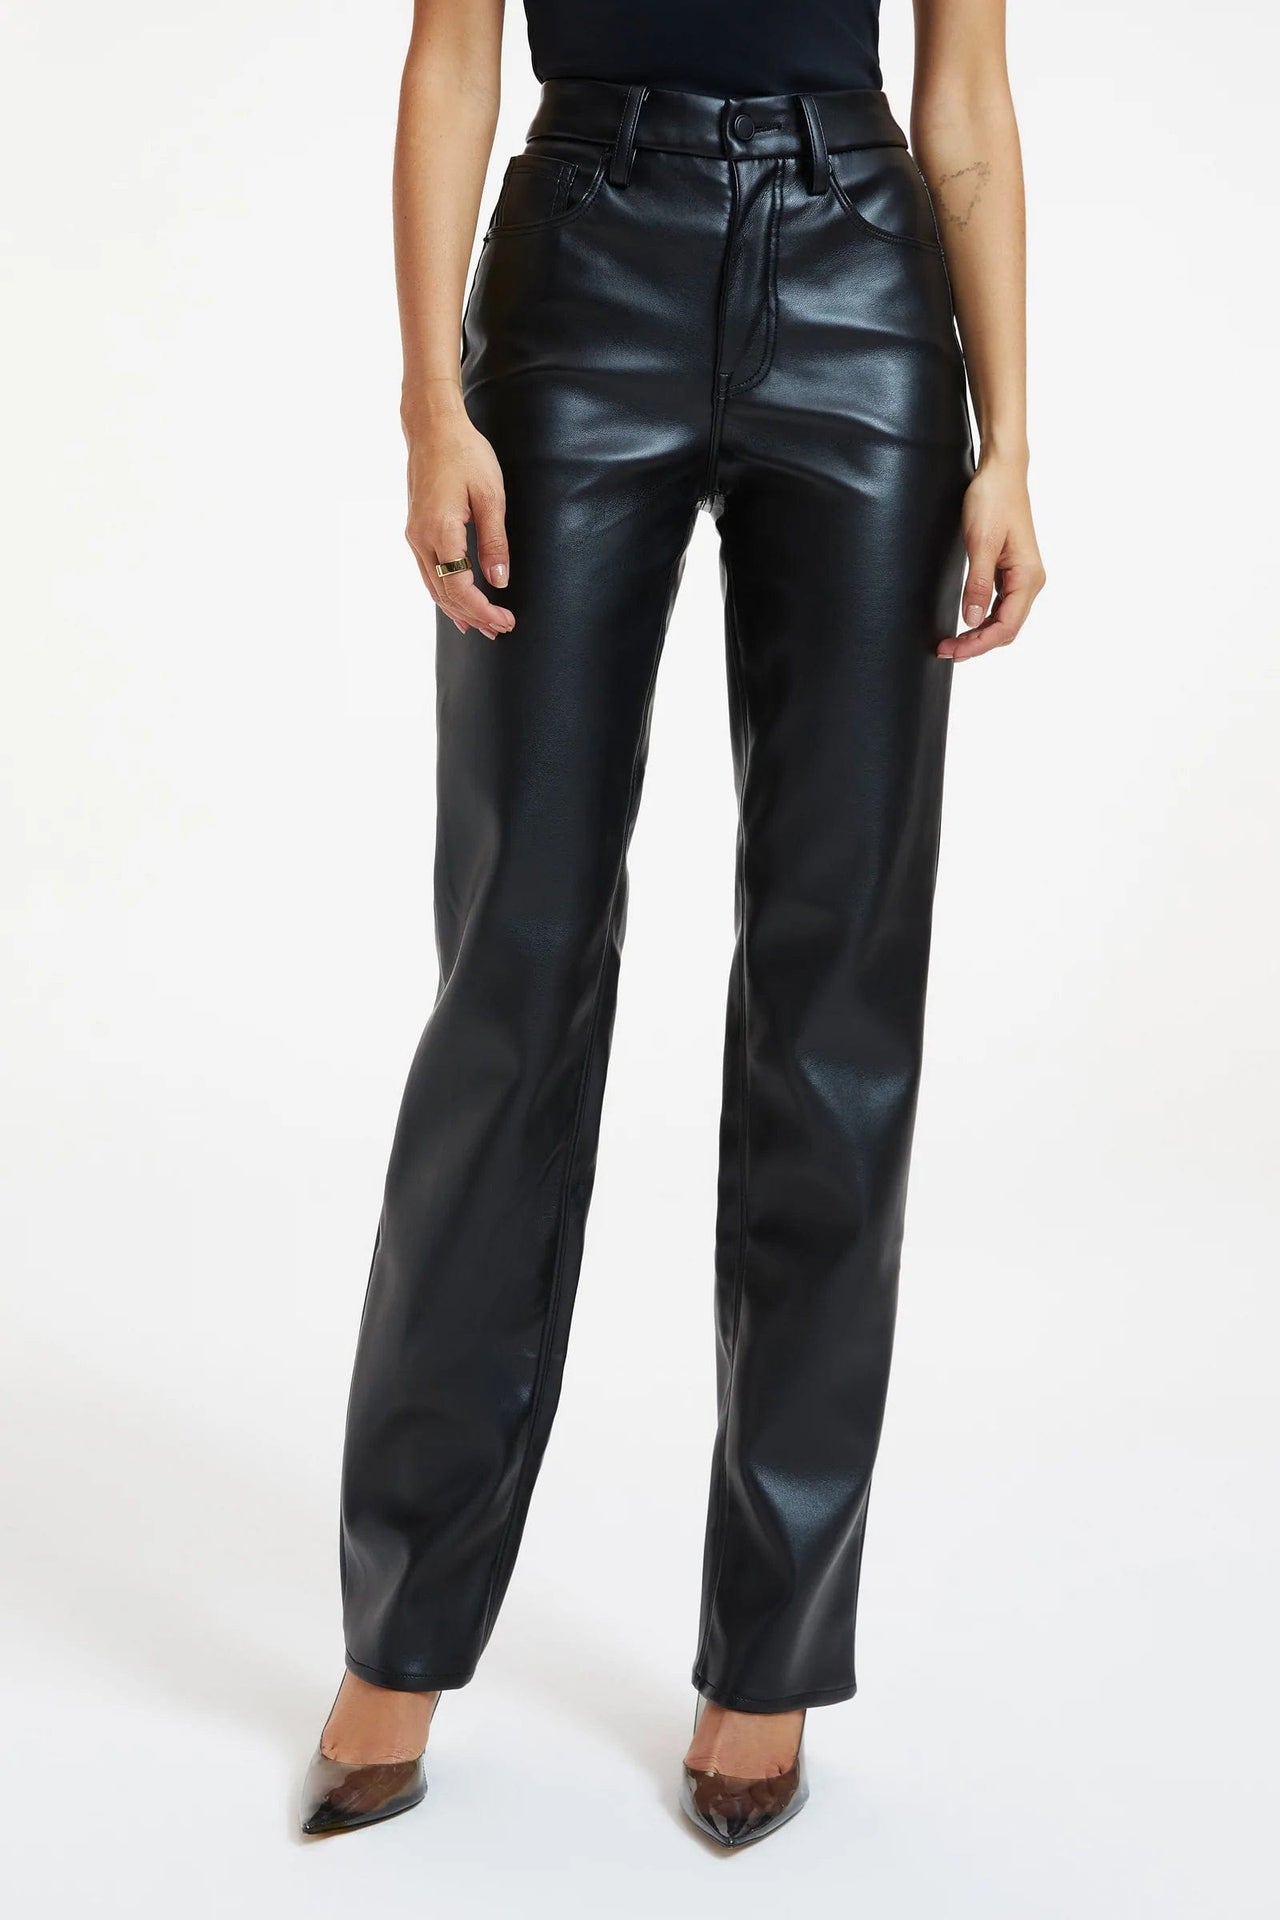 Better Than Leather Good Icon Black, Bottoms by Good American | LIT Boutique